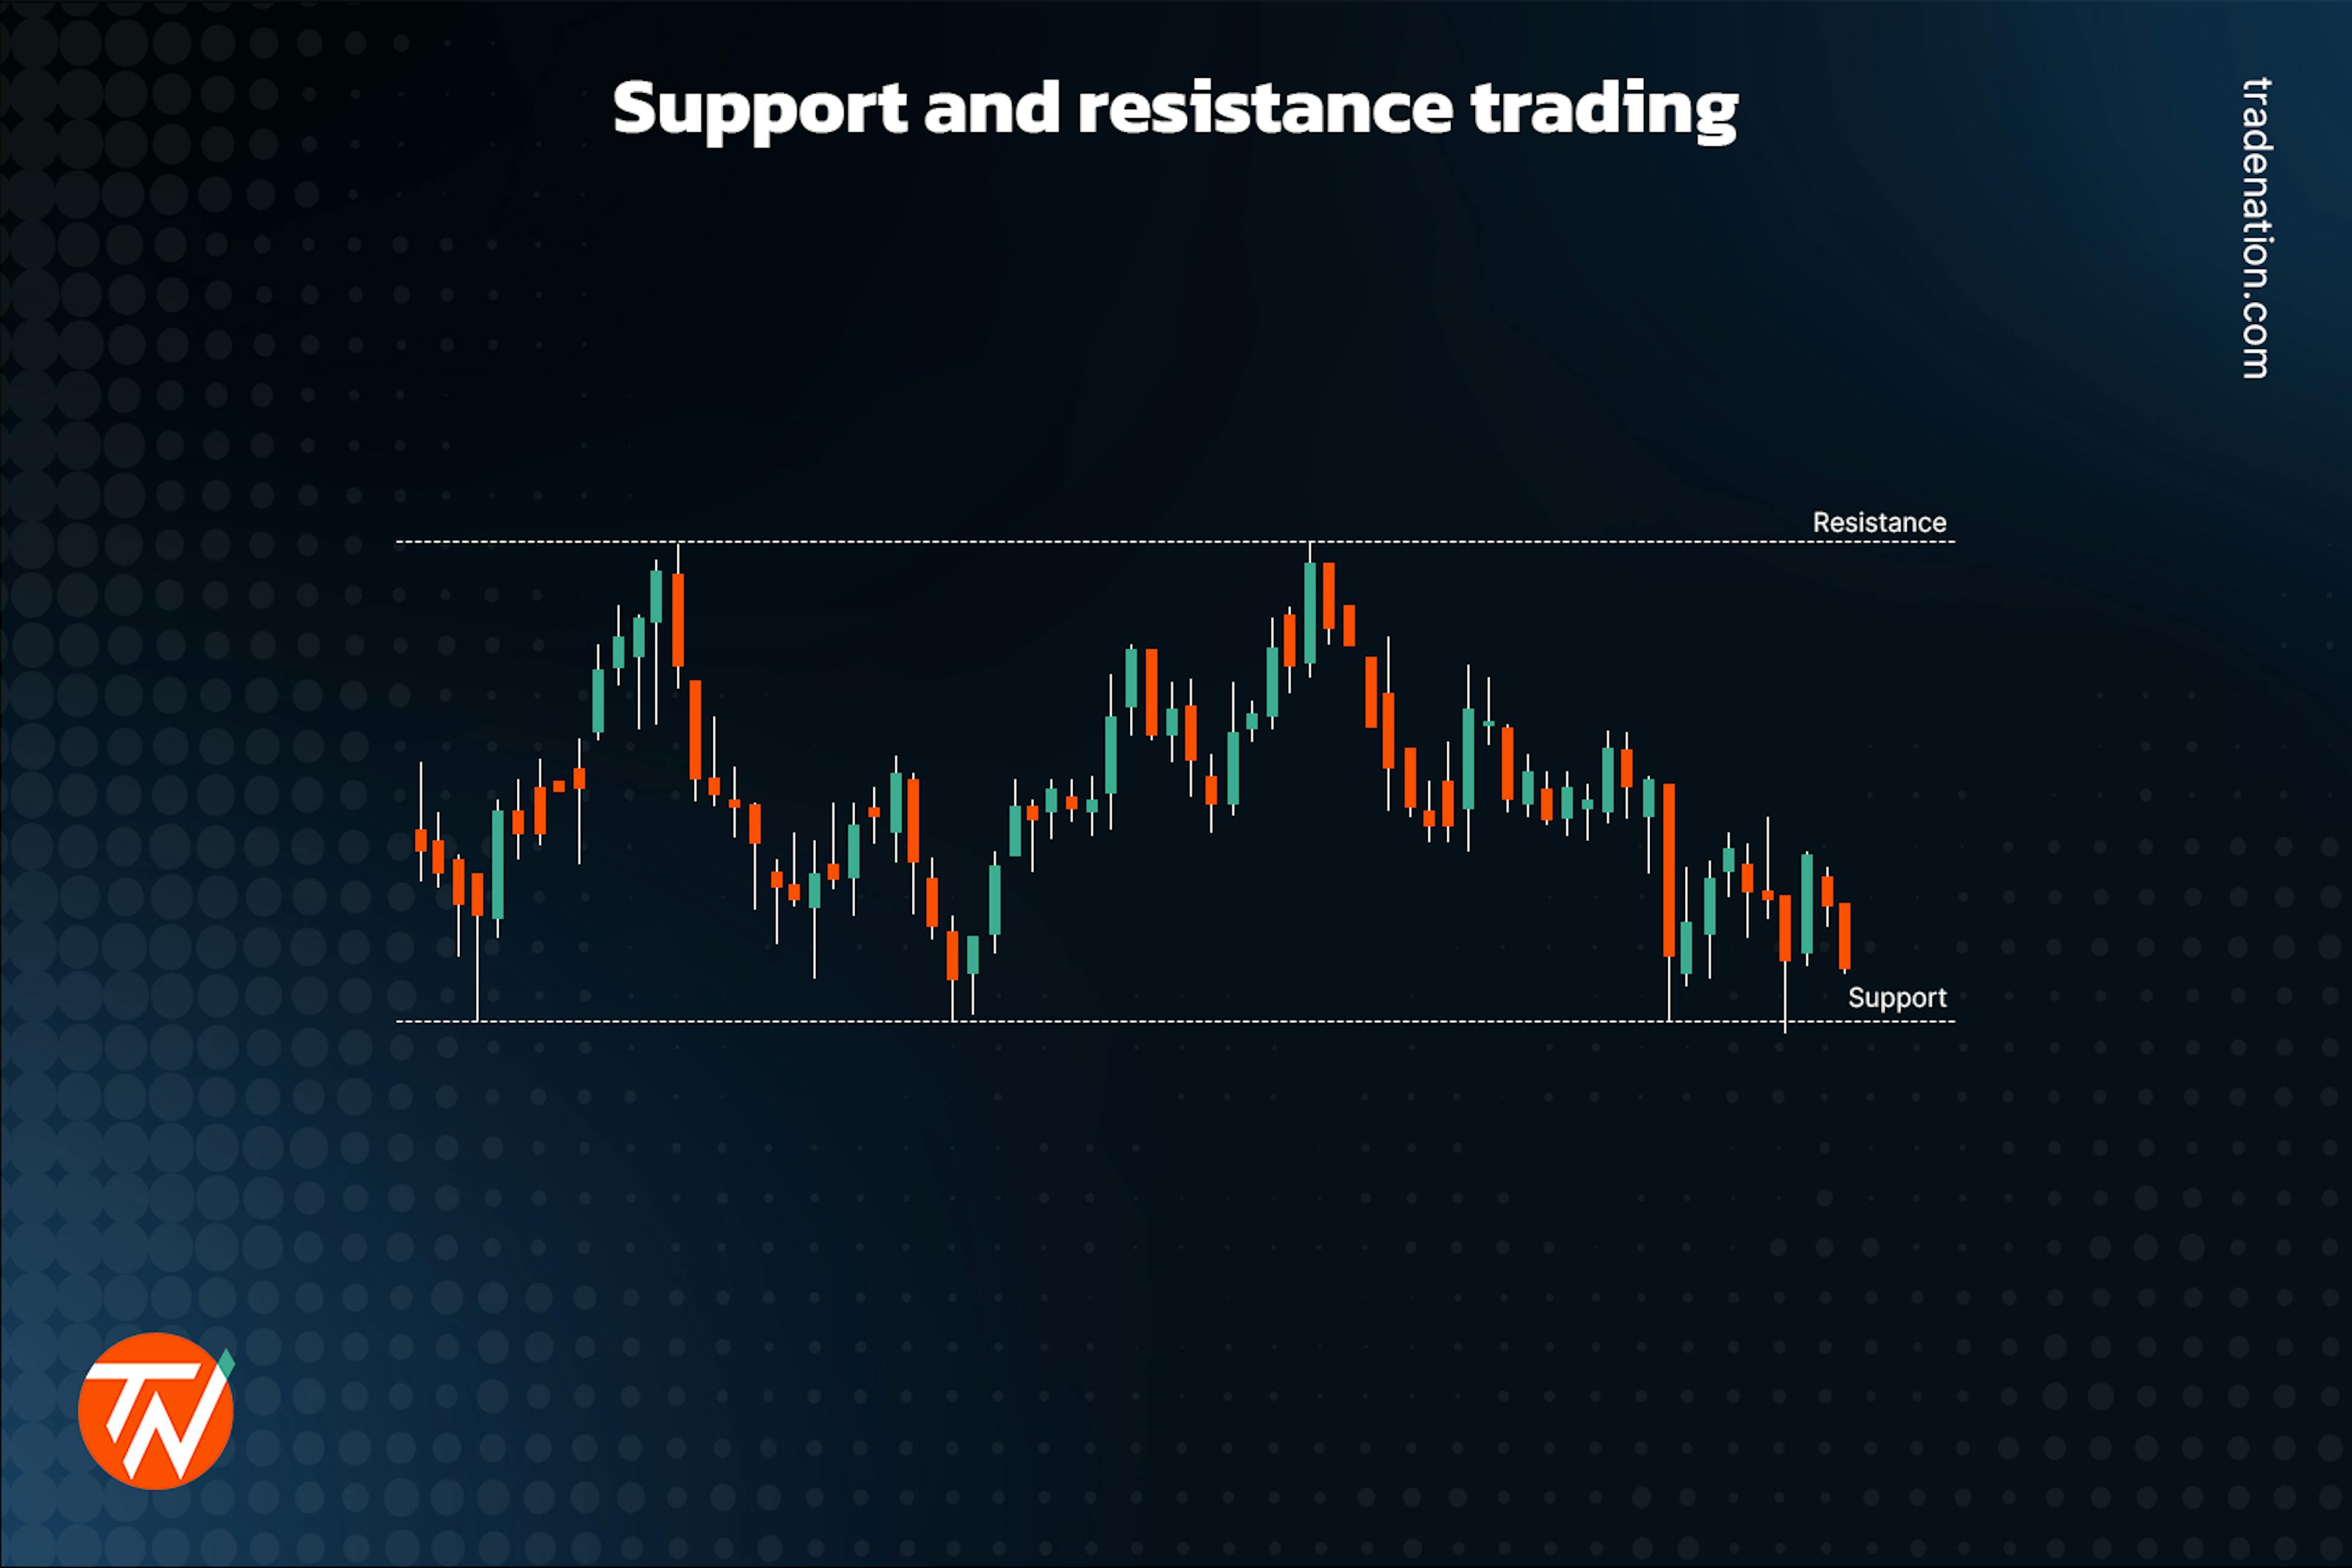 Support and resistance trading explained